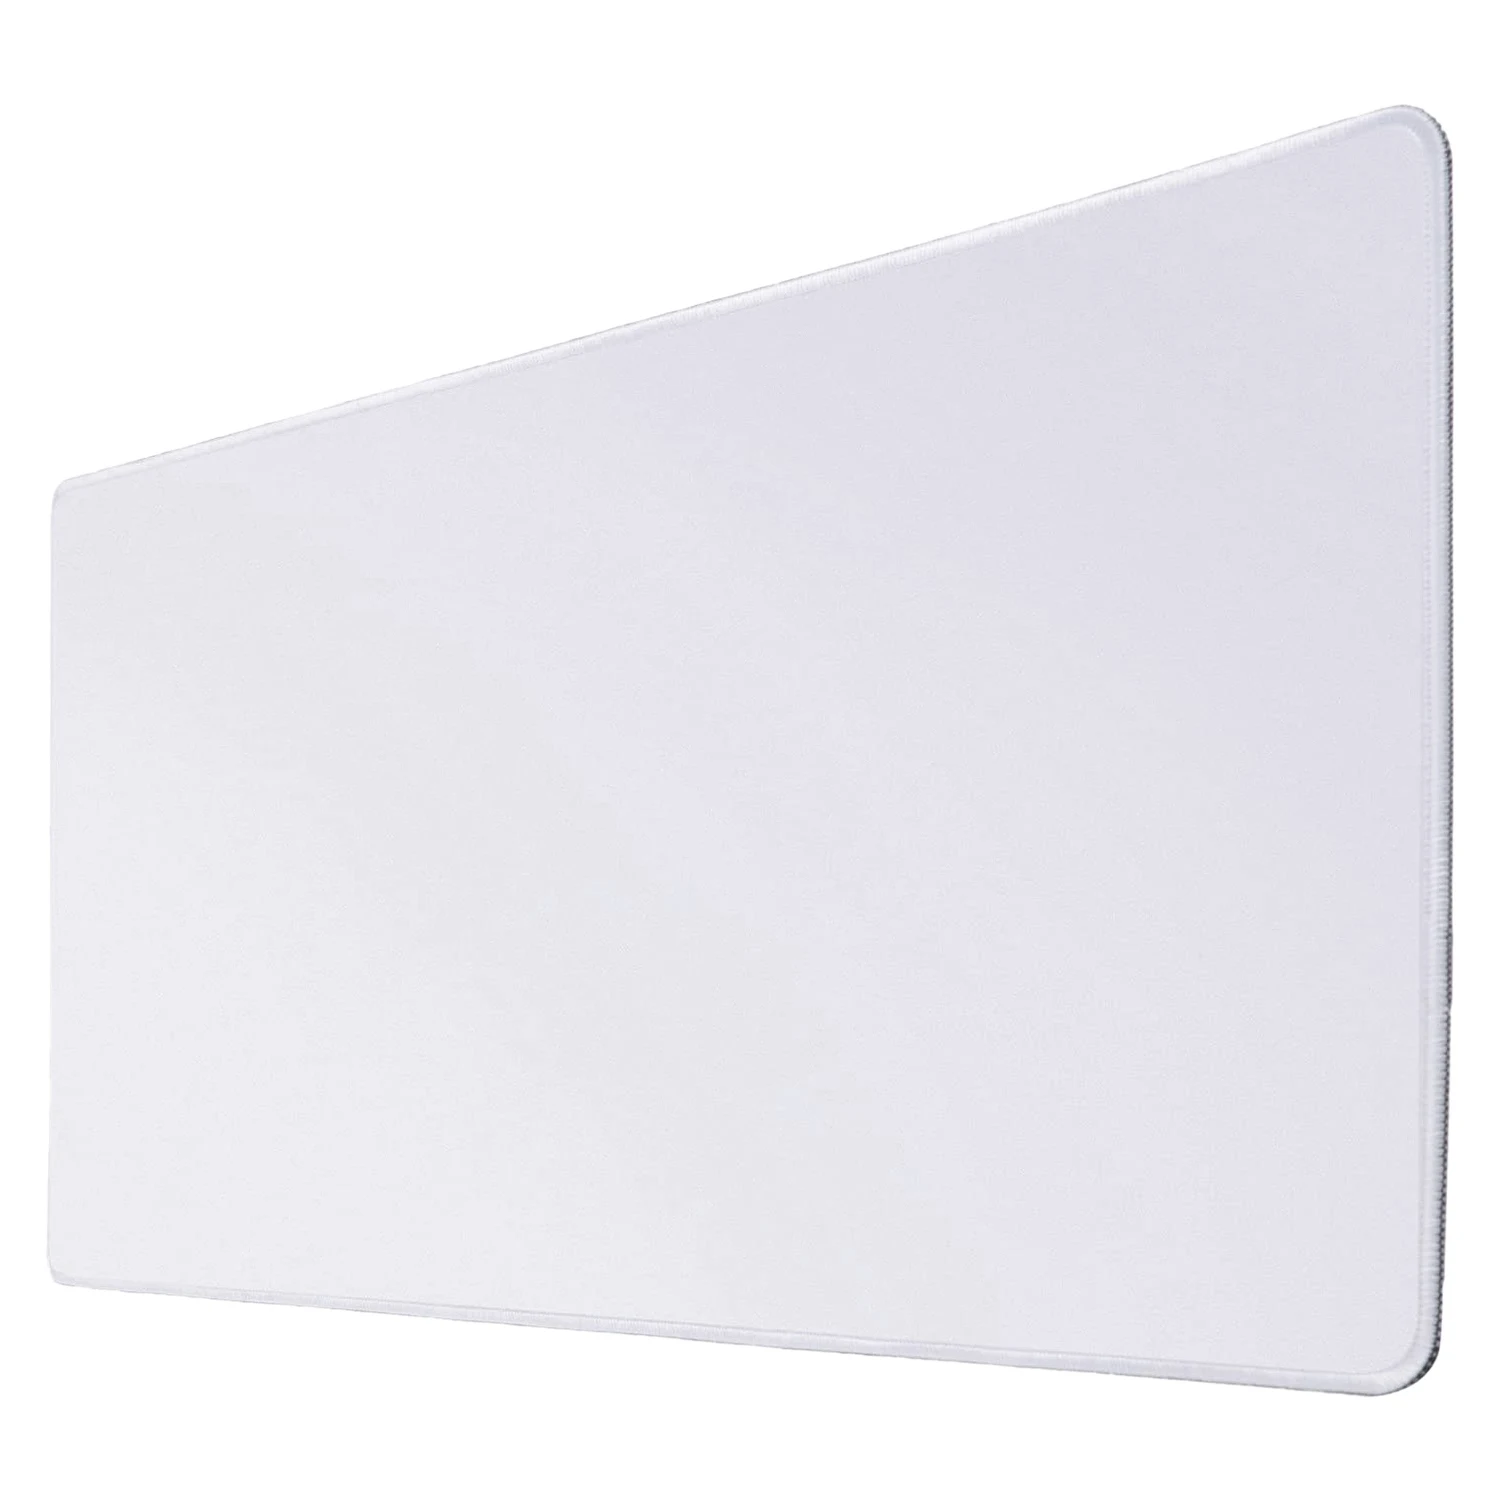 

Mouse Pad, Extended Non-Slip Rubber Base Of Gaming Mouse Pad, Suitable for Work, Study and Entertainment-White Seam